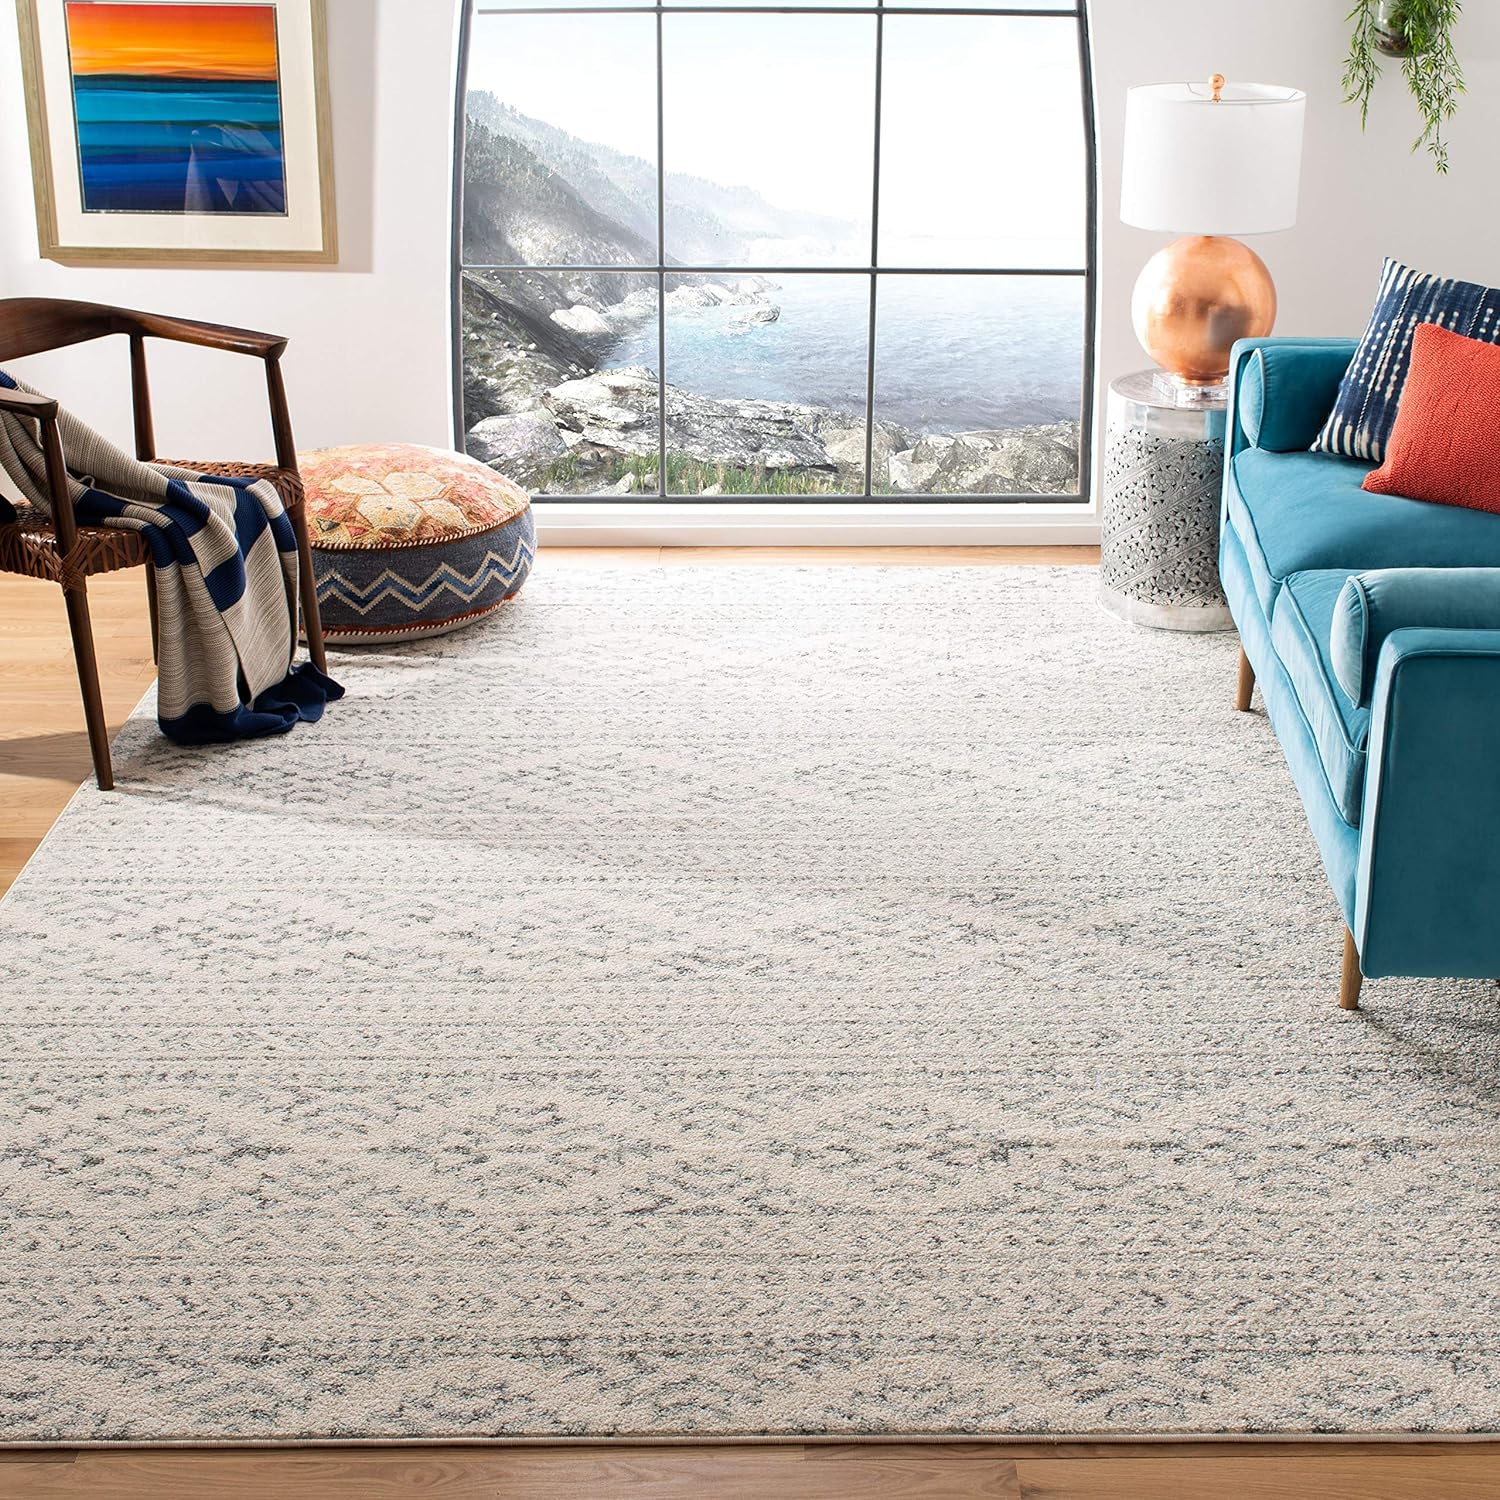 Outdoor Rugs With Free Kmart, Kmart Area Rugs 8 X 10